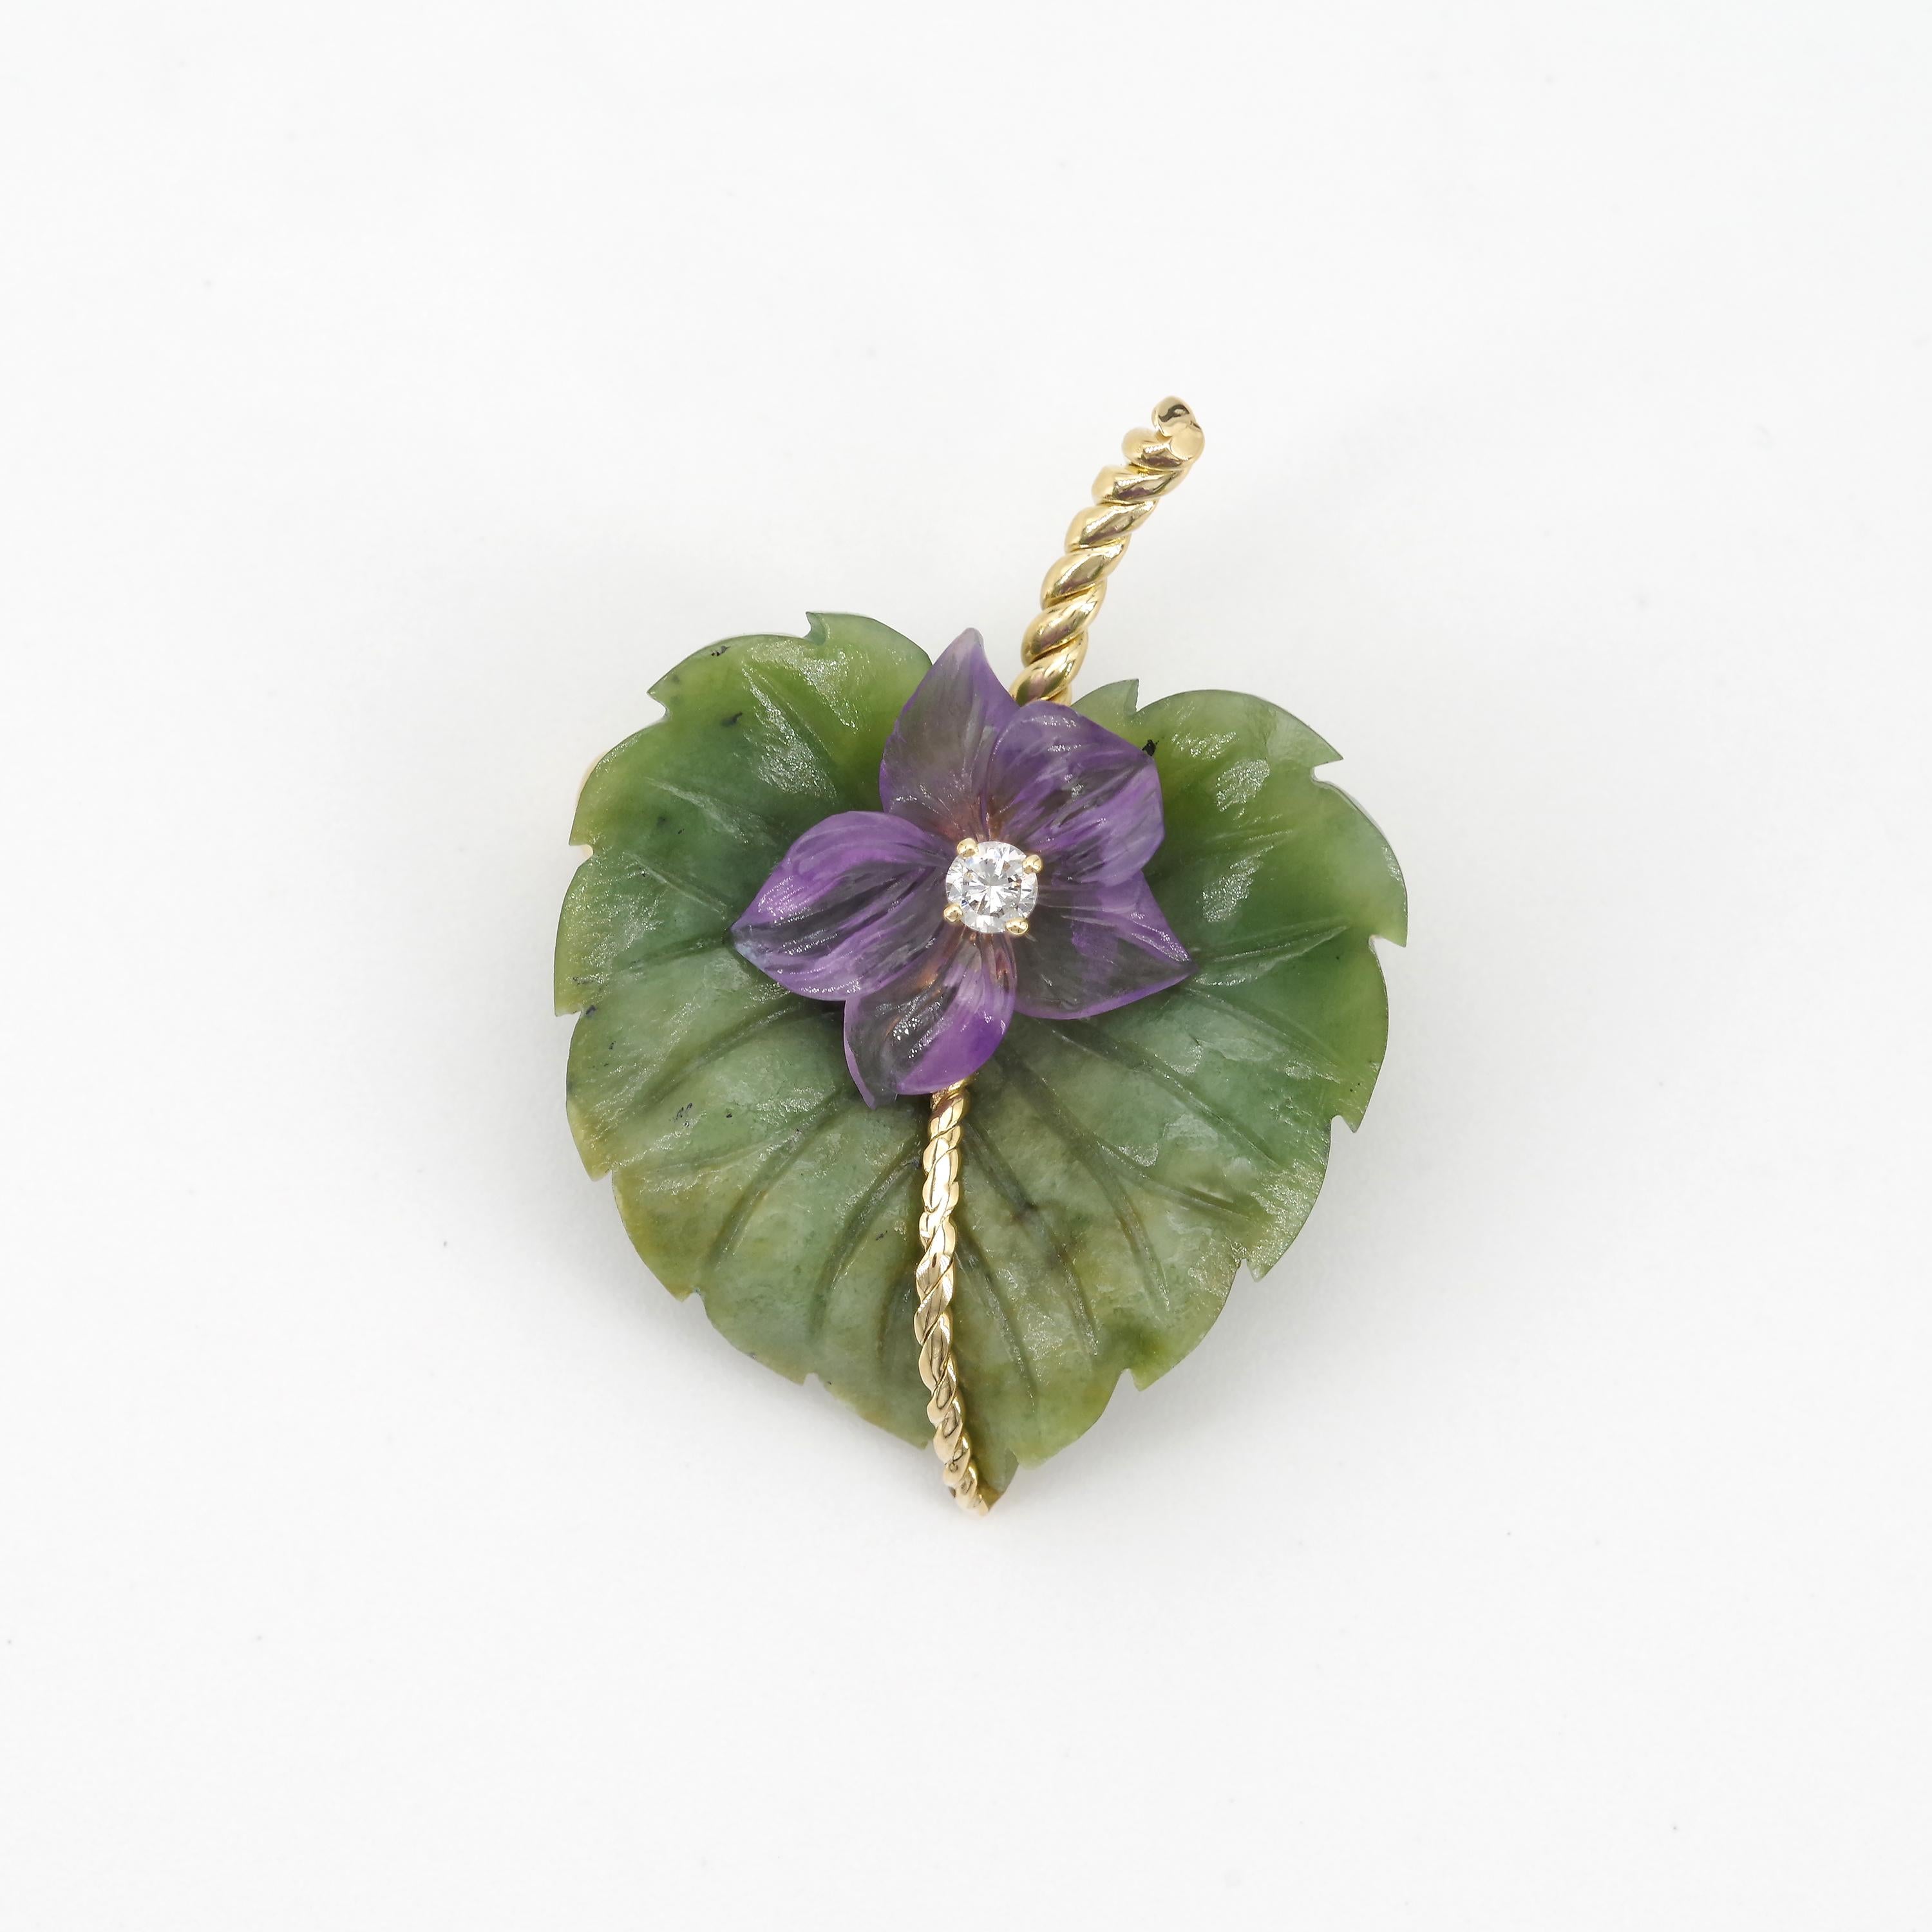 Modern Tiffany & Co. Jade and Amethyst Brooch with Diamond from Midcentury, Austria